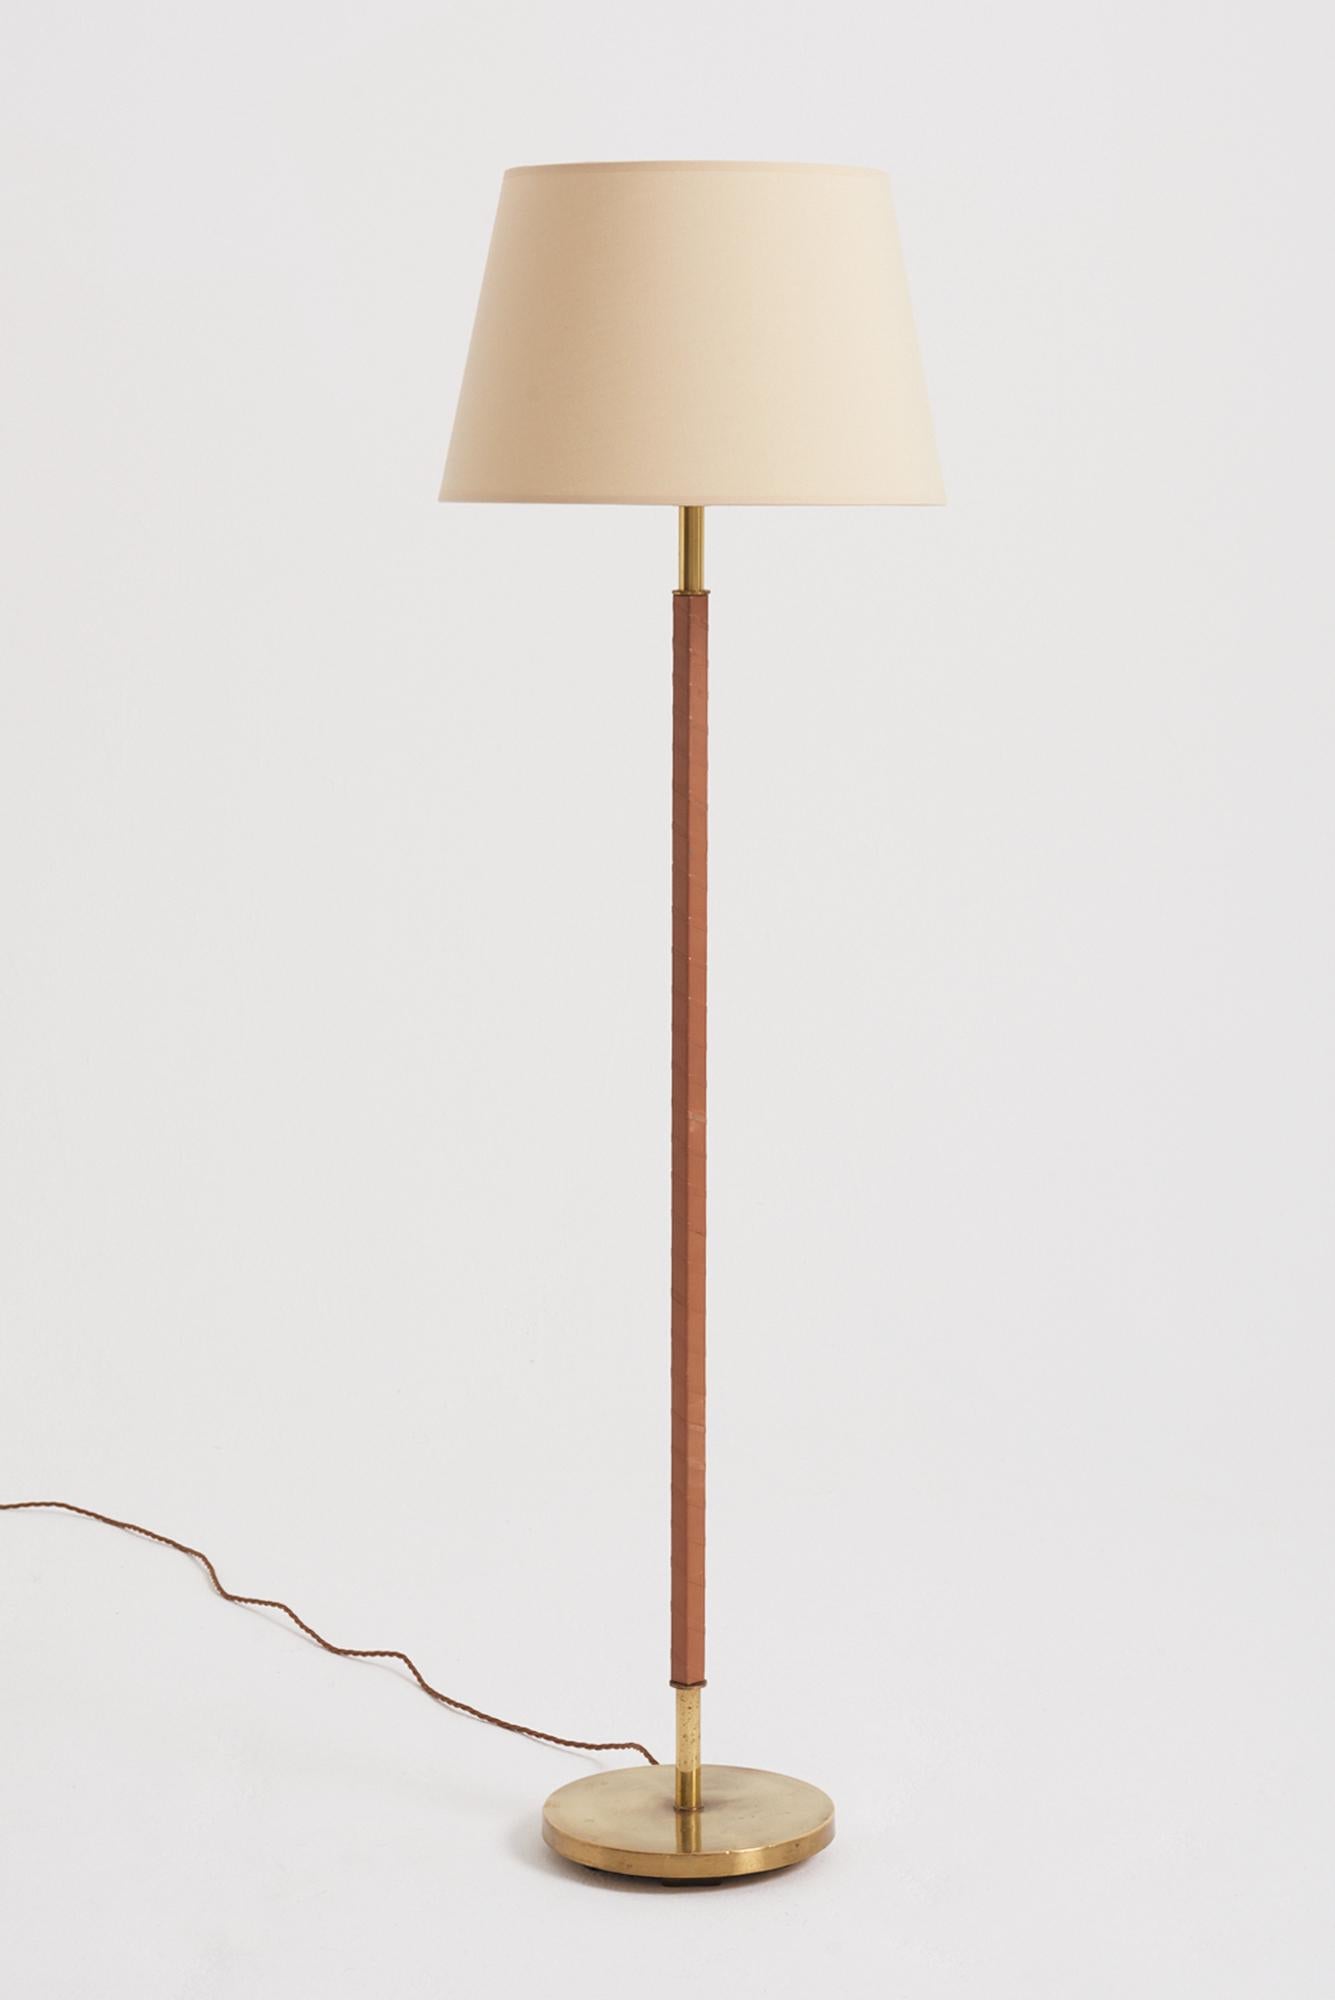 A brass and twisted faux tan brown leather floor lamp.
Sweden, third quarter of the 20th Century
With the shade: 139.5 cm high by 41 cm diameter
Lamp base only: 120 cm high by 24.5 cm diameter